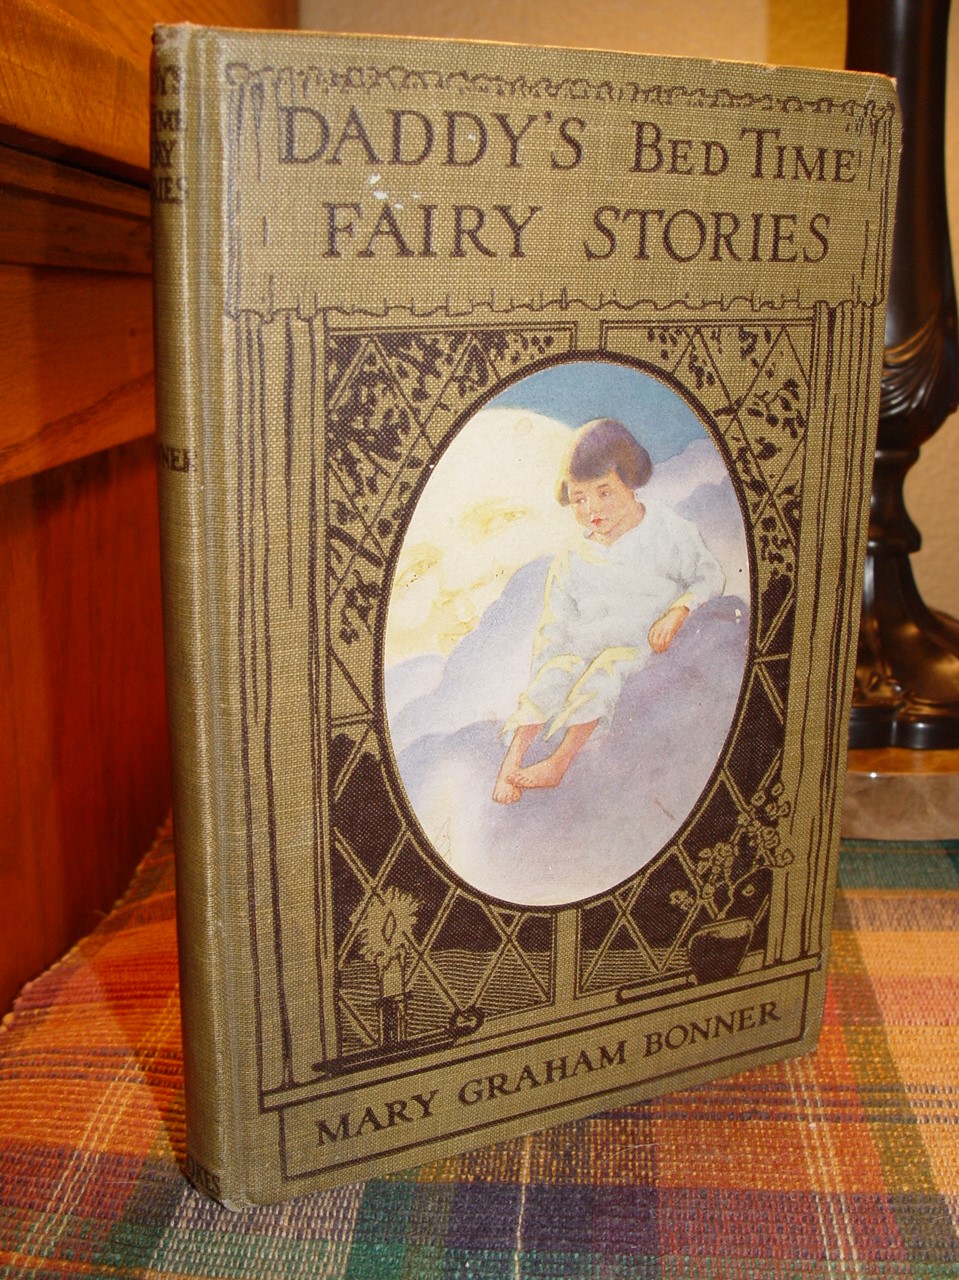 Daddys Bedtime Fairy Stories 1916 by Mary
                        Graham